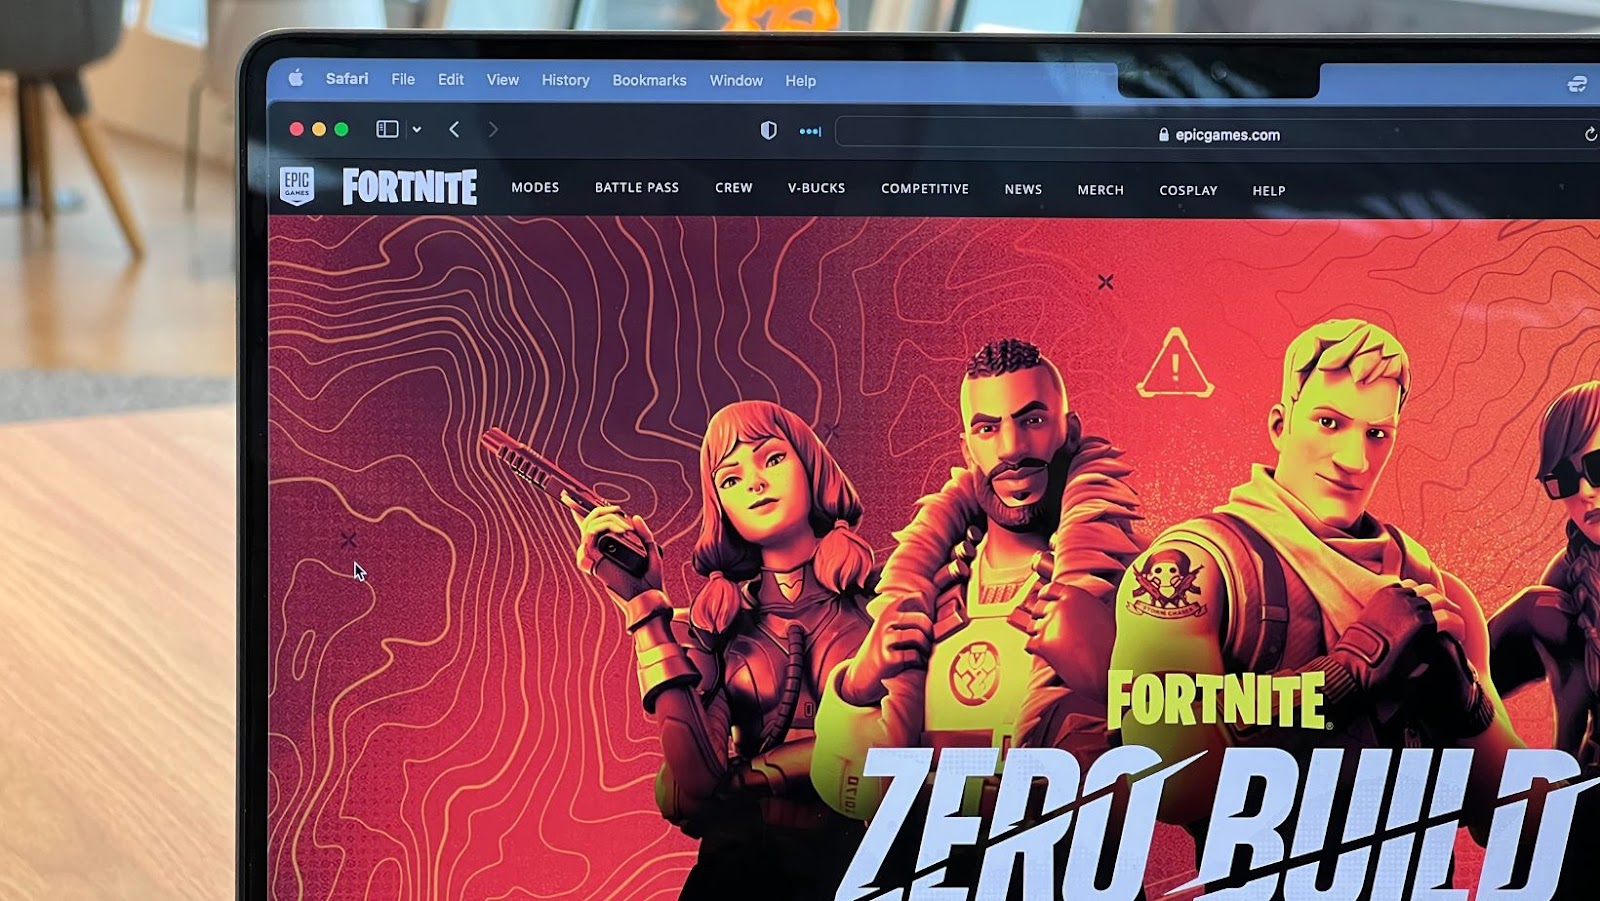 http //fortnite.com/2fa to enable